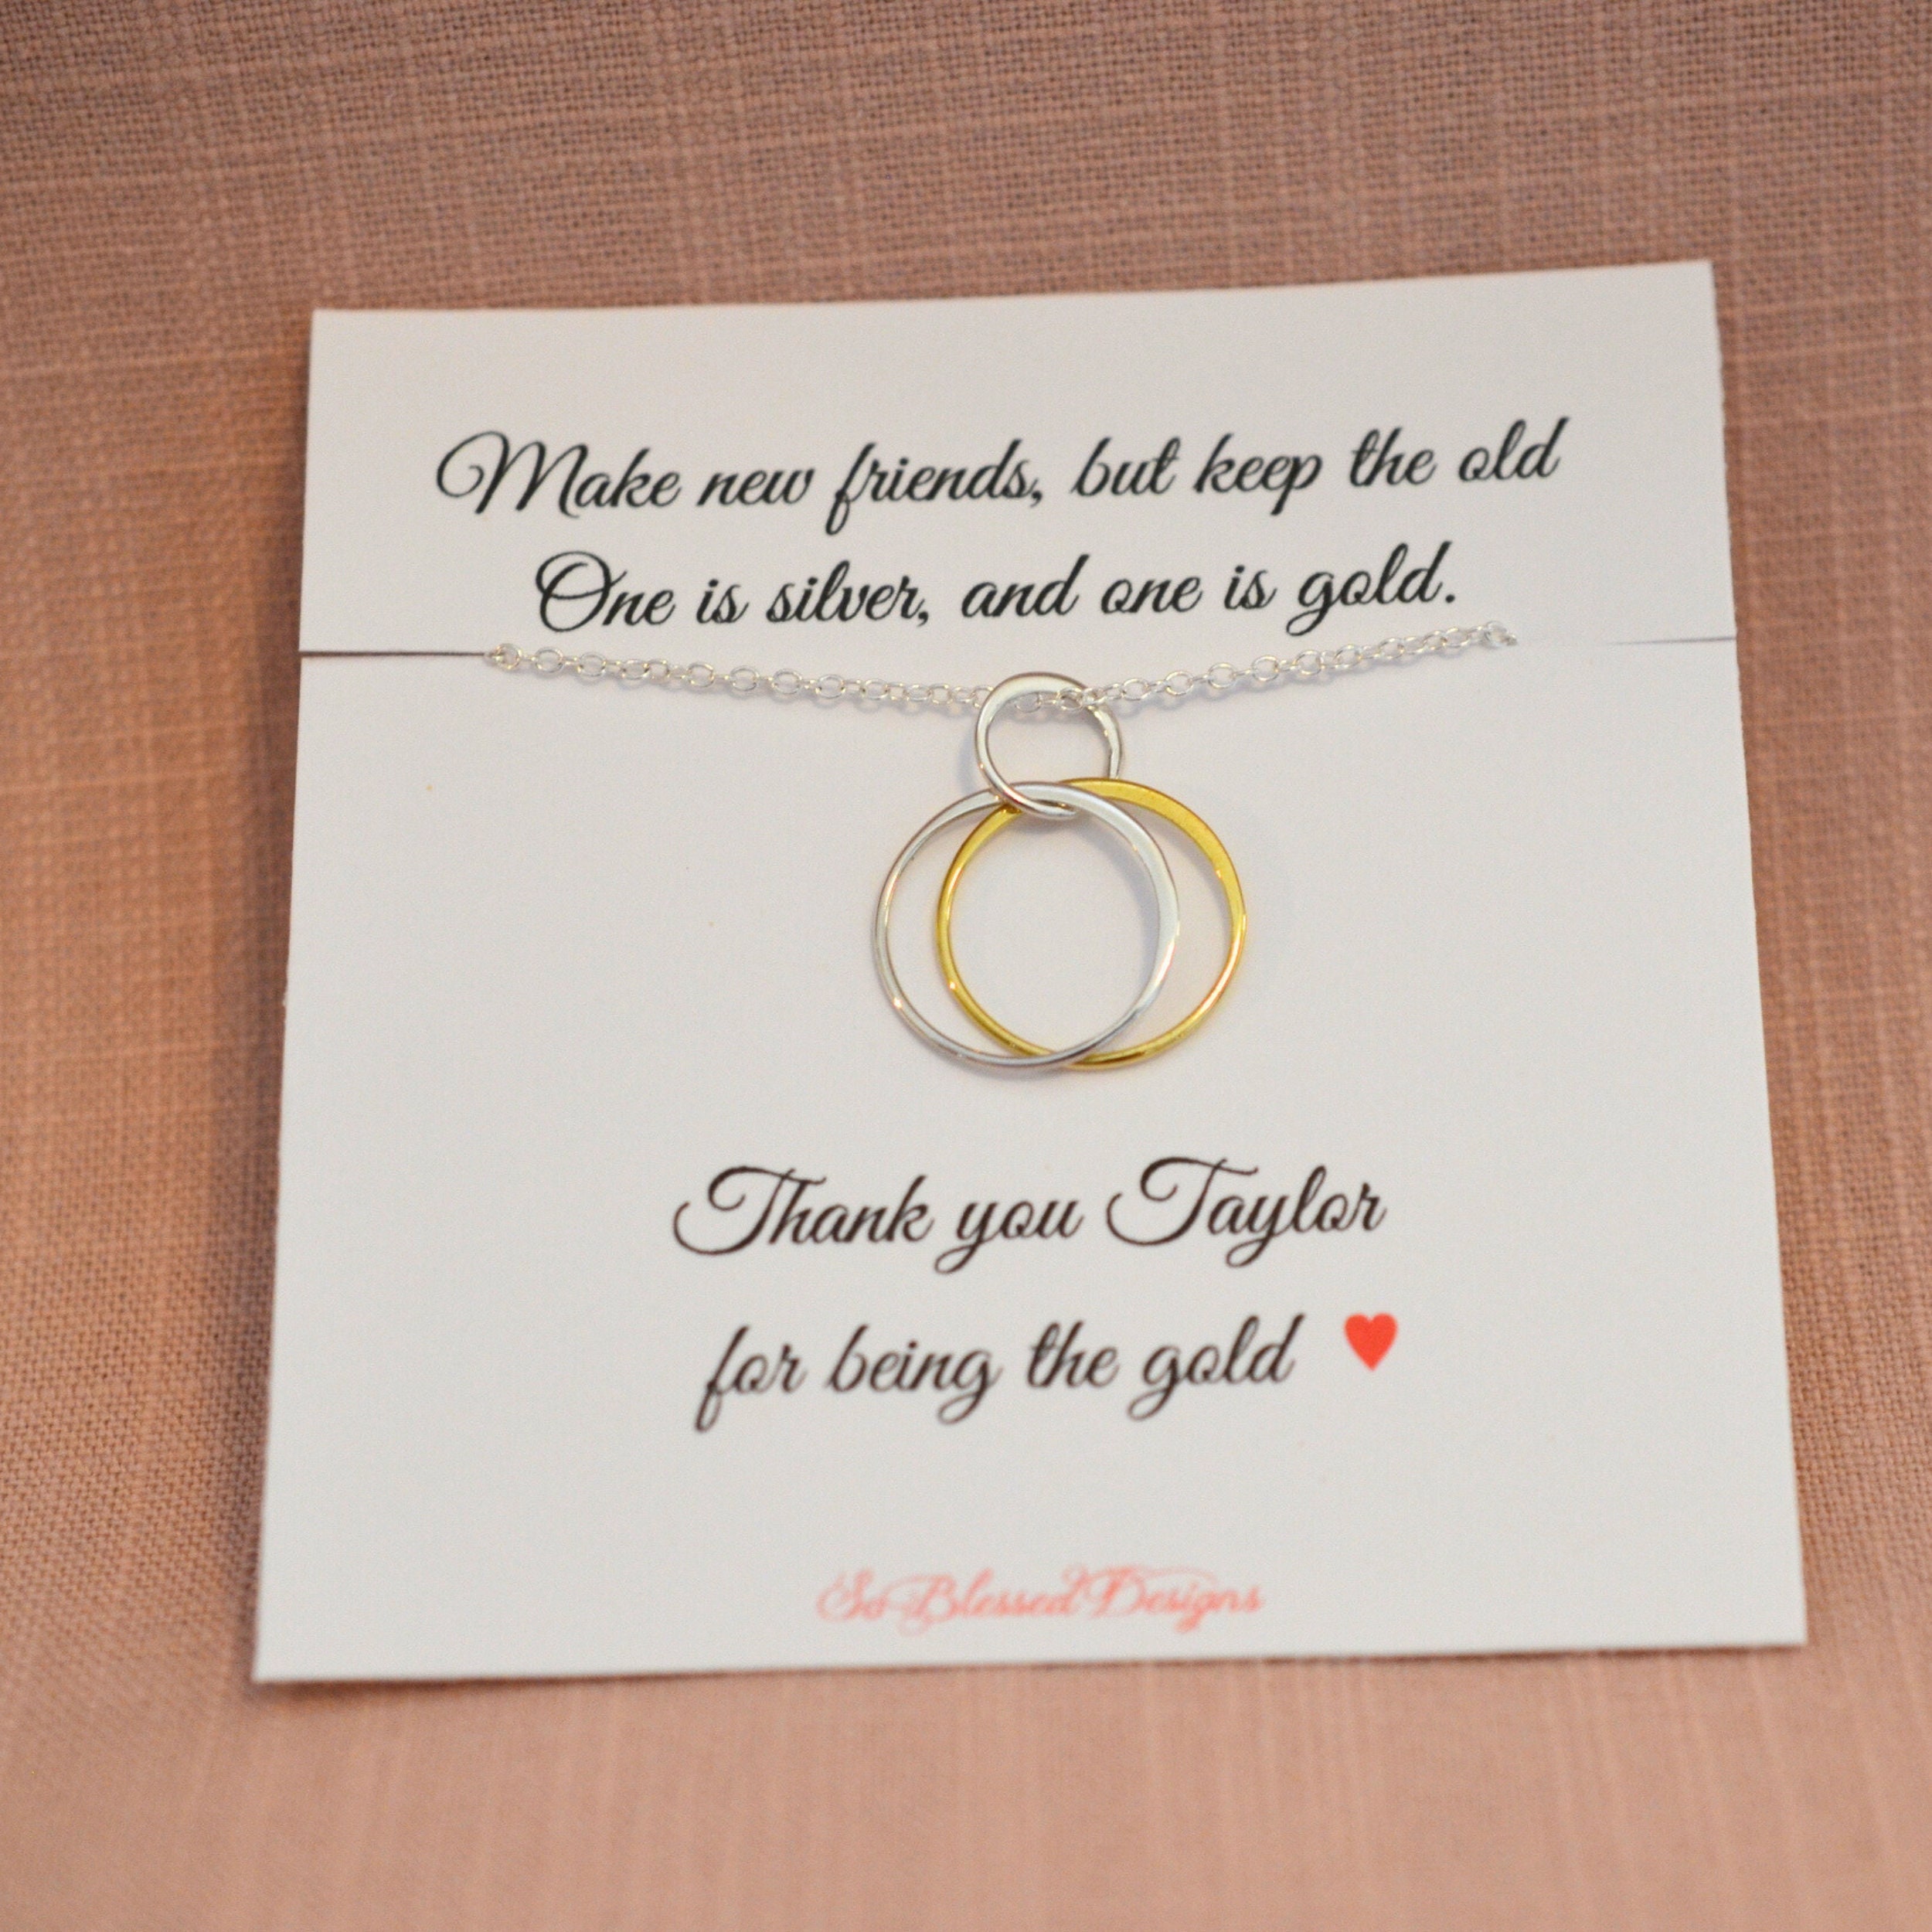 95 Short and Sweet Wedding Quotes